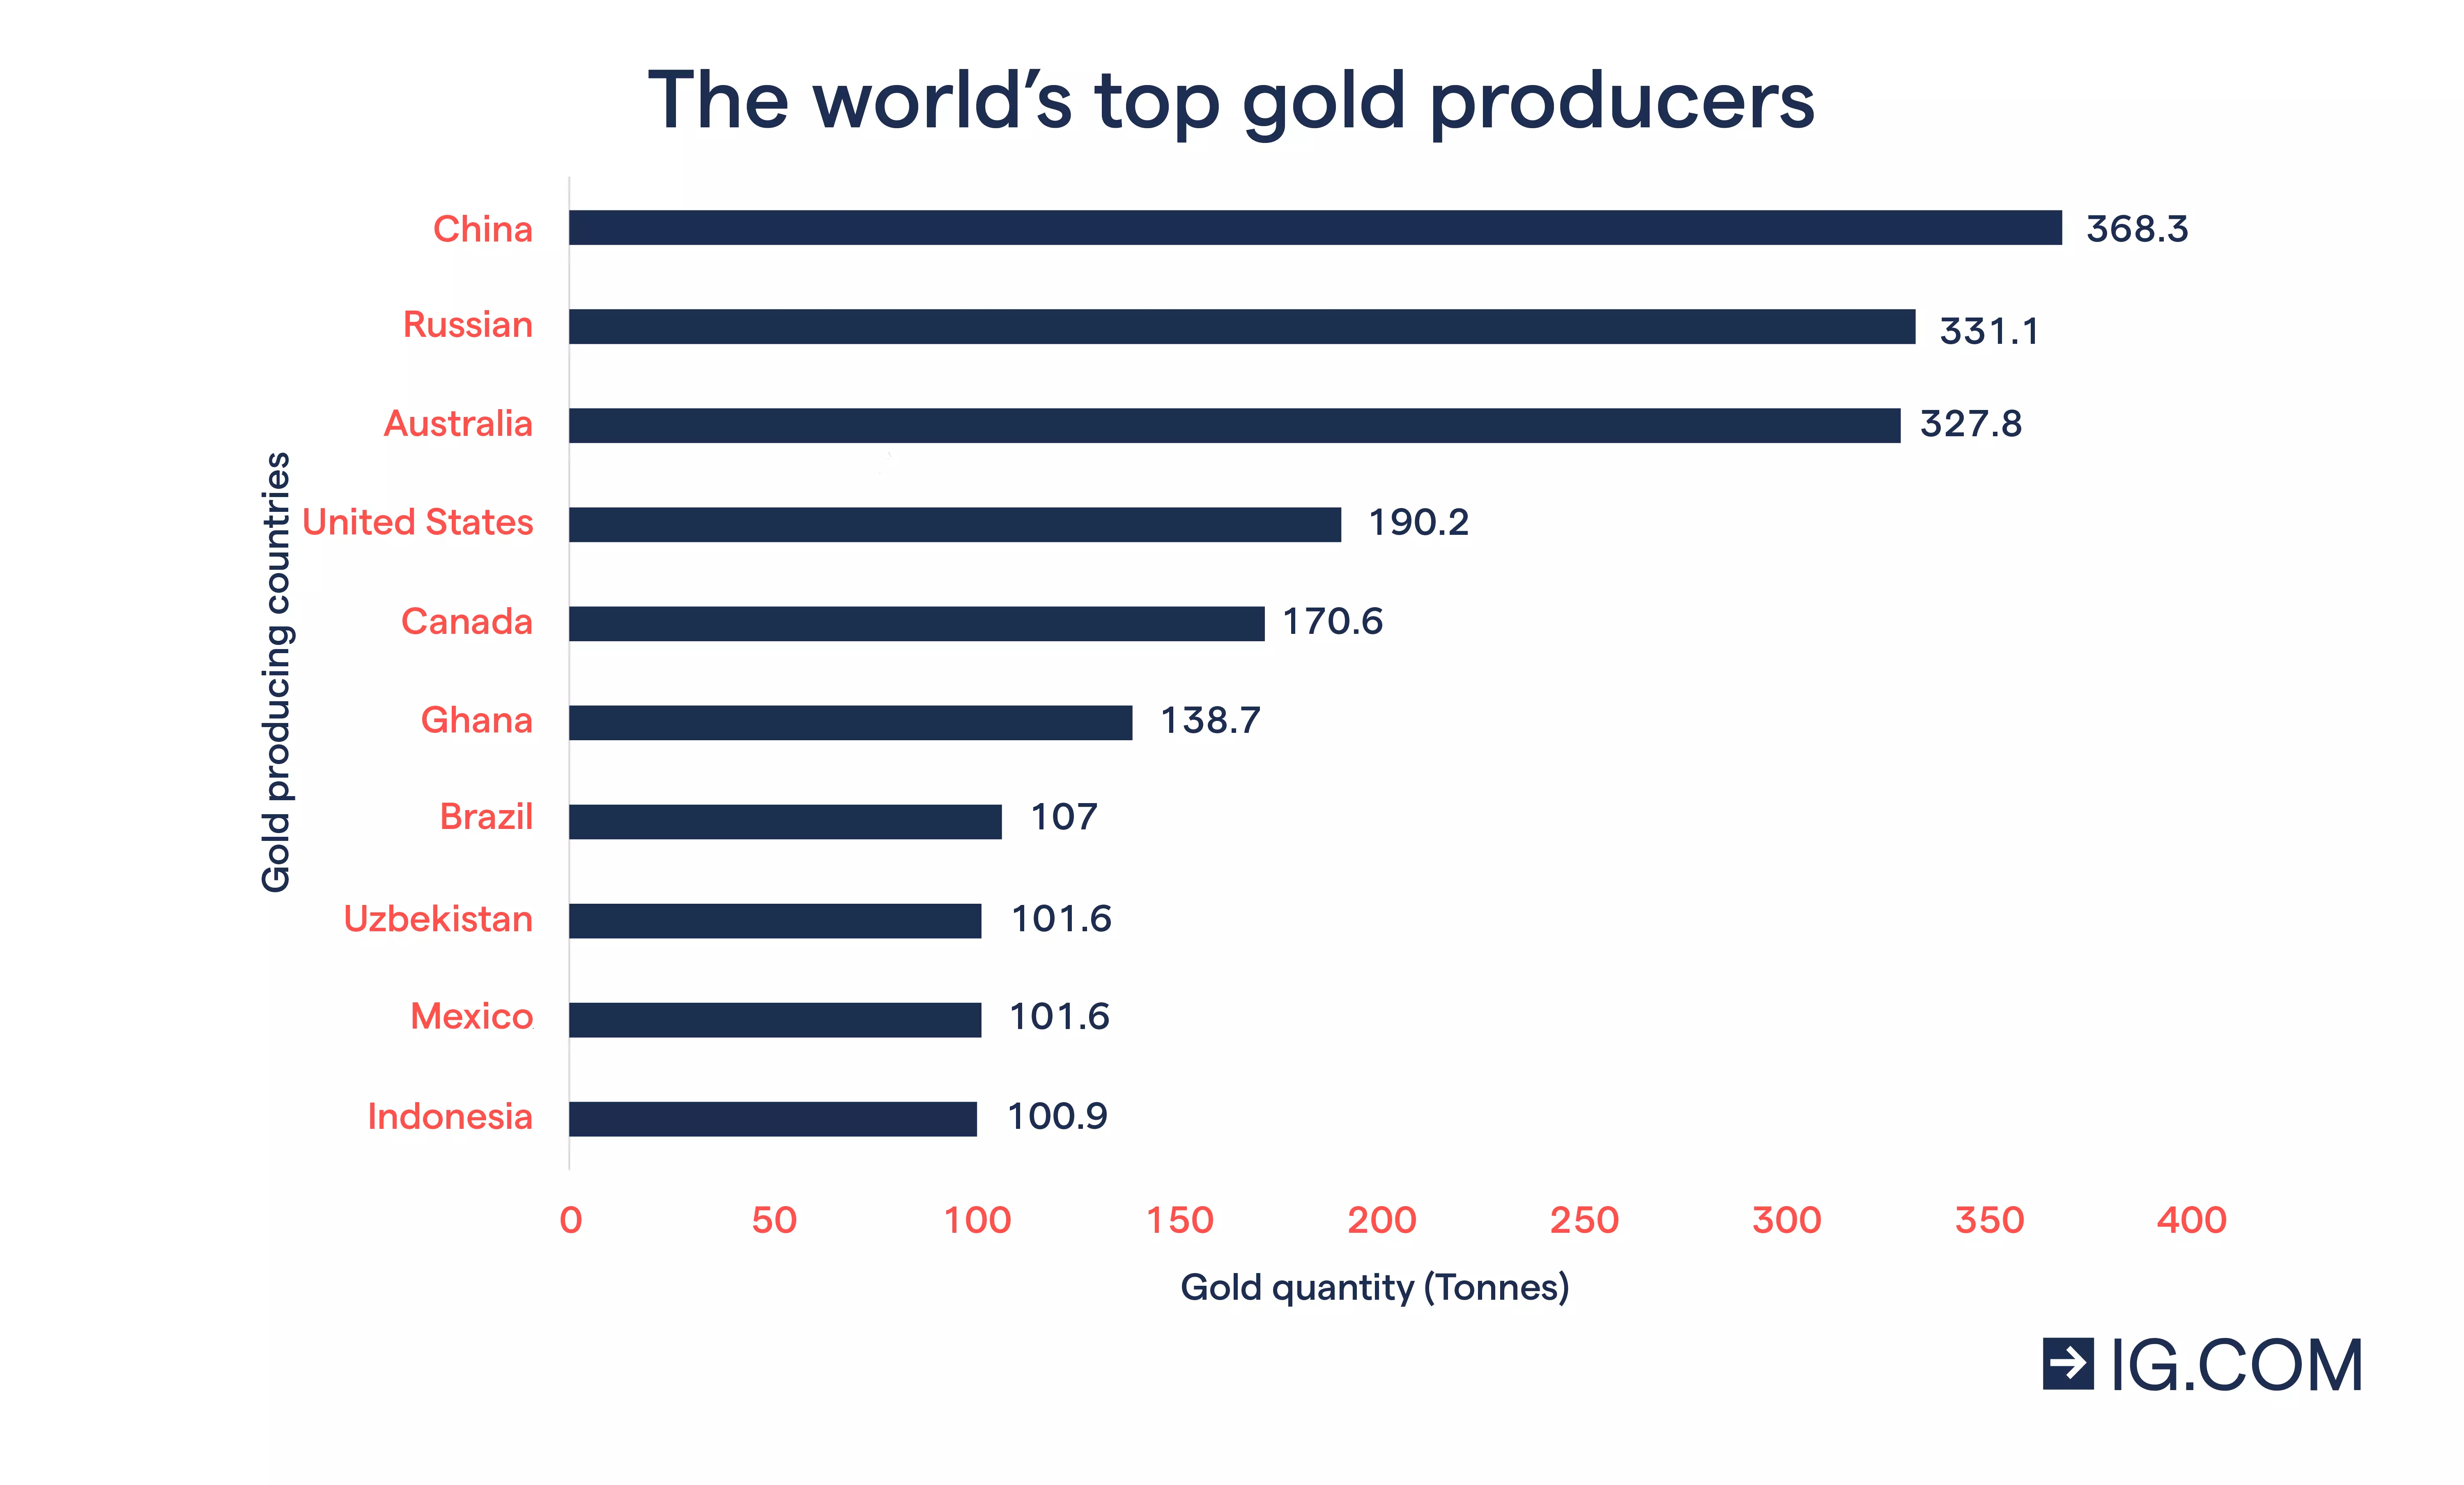 Bar chart showing the world's top ten gold producers by country with China in the first position and Indonesia in tenth position.